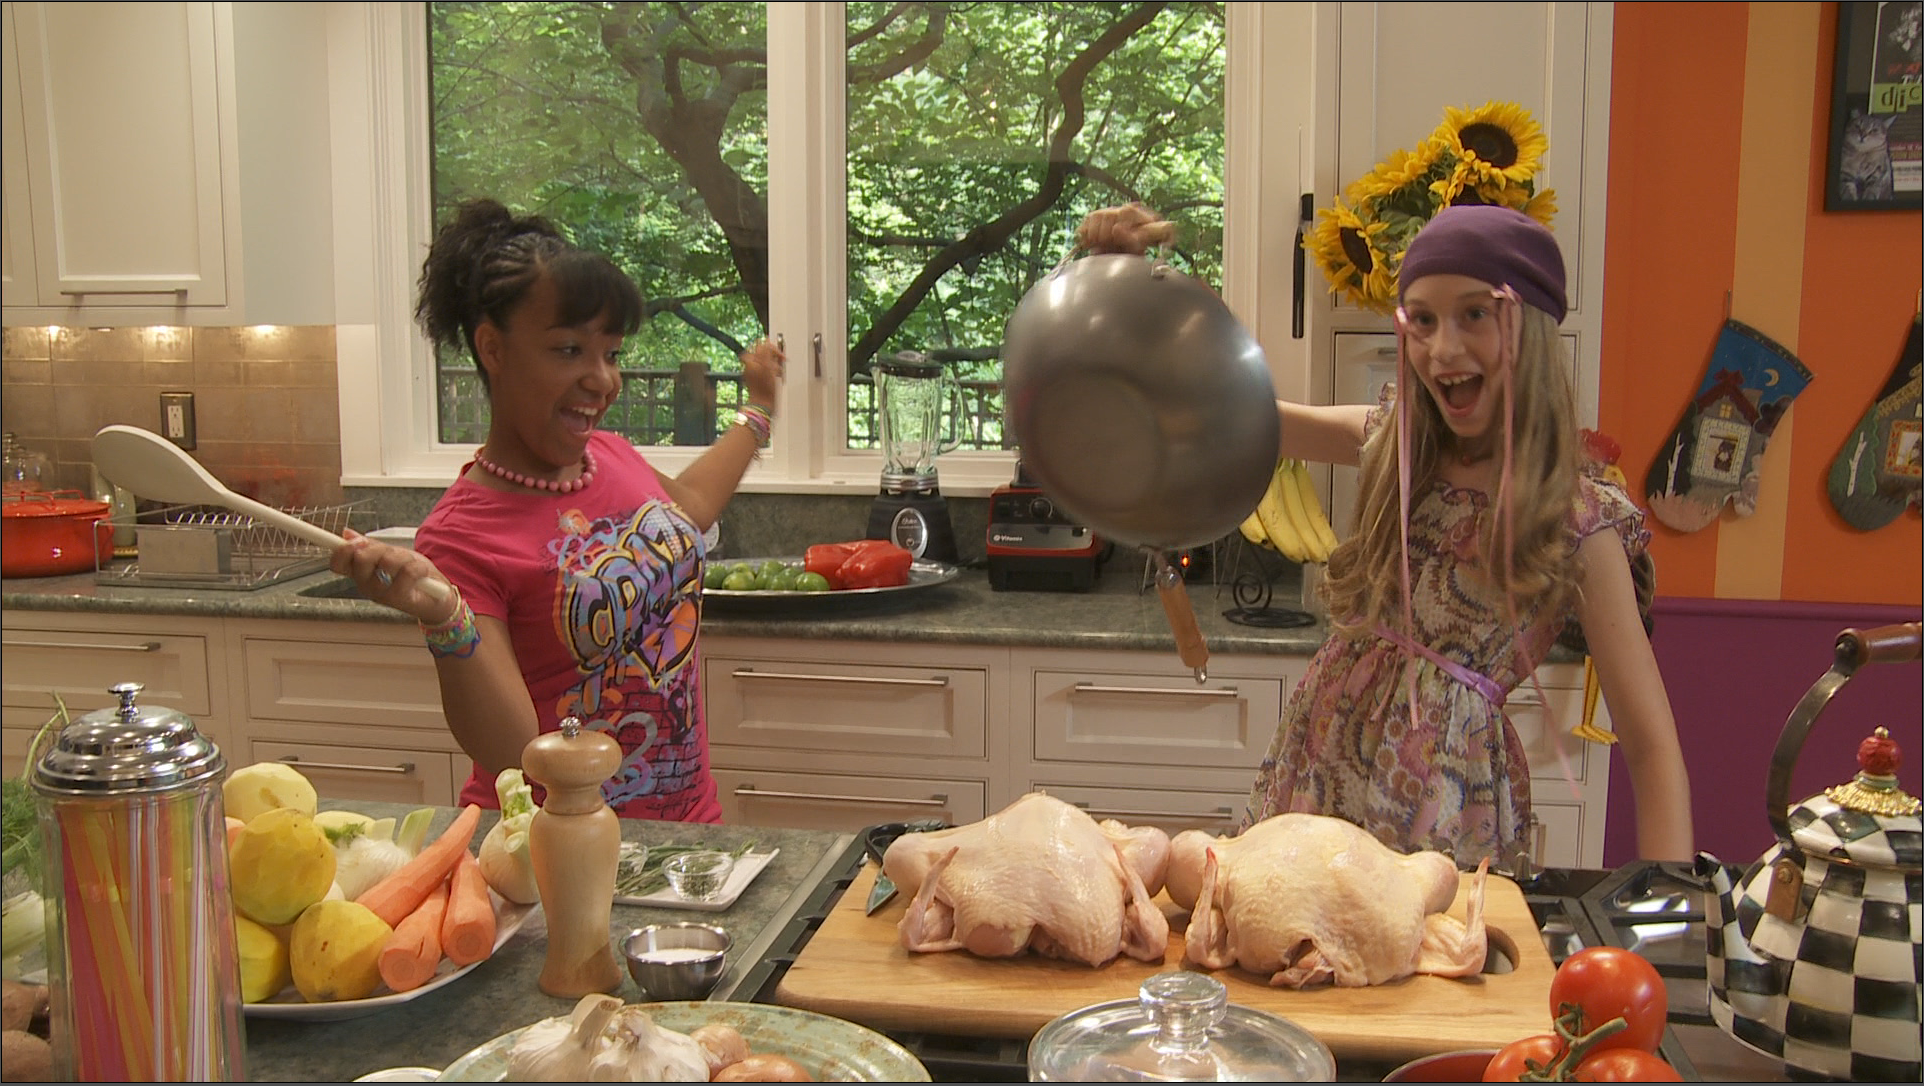 KickinKitchen.TV\, a Hip New Cooking TV Series and Interactive Website for  Tweens and Teens! | FoodDayMA